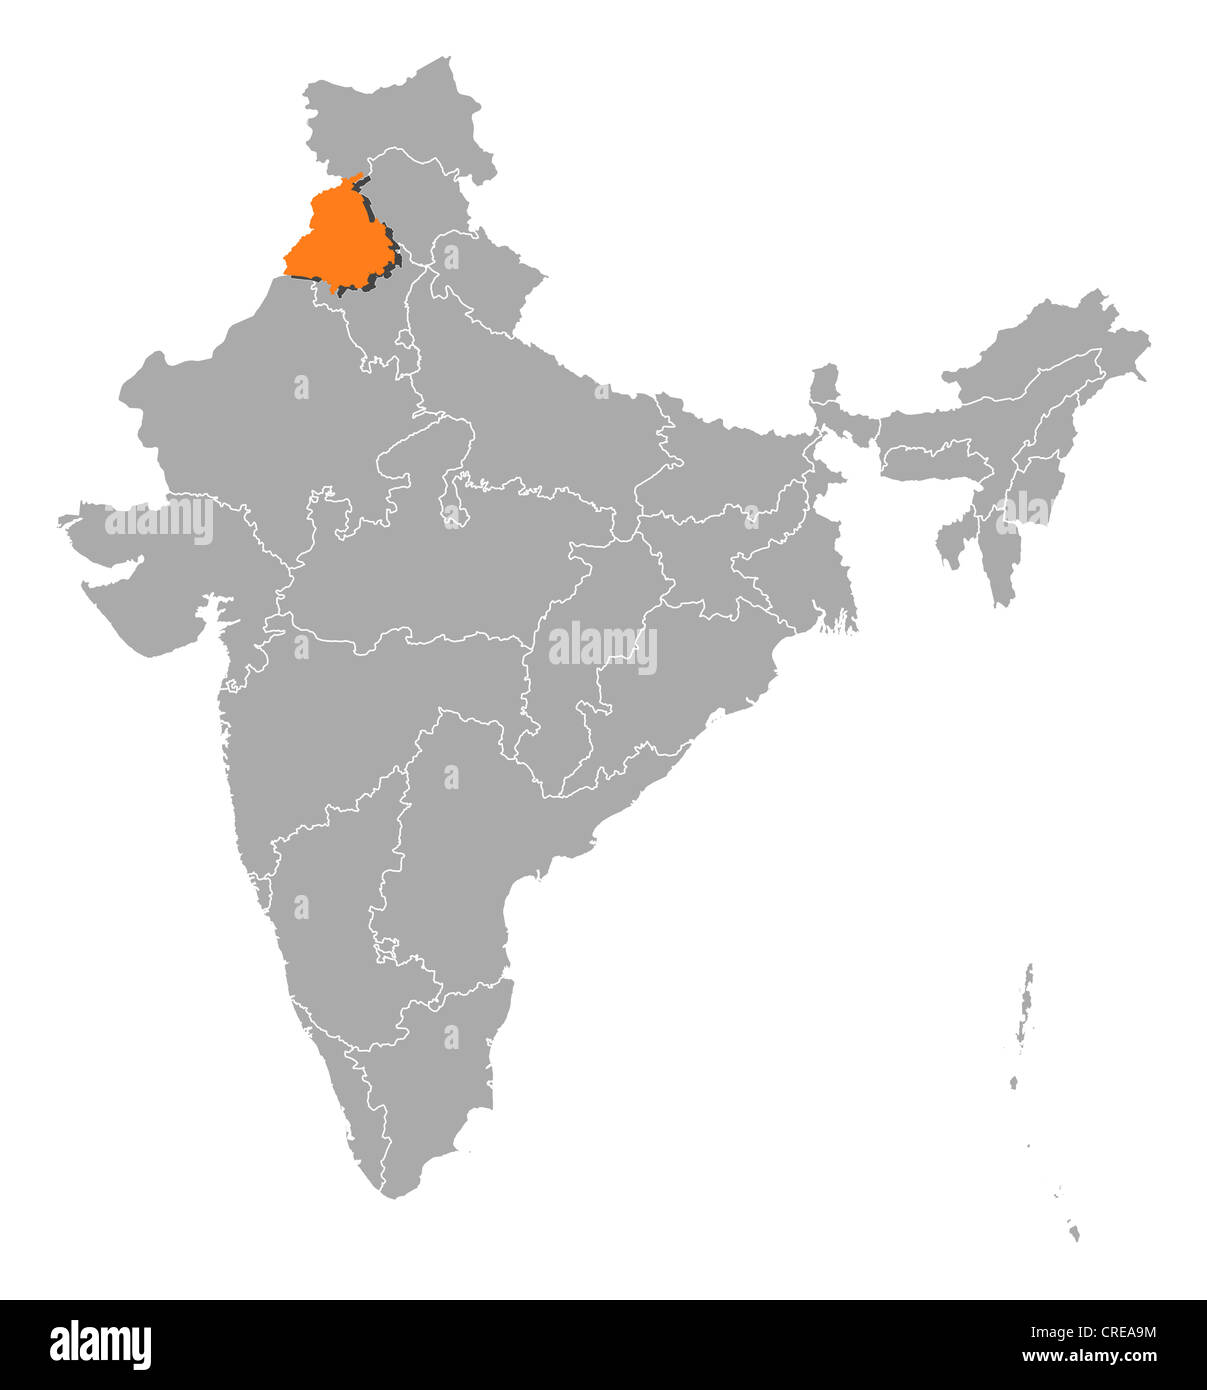 Political map of India with the several states where Punjab is highlighted. Stock Photo